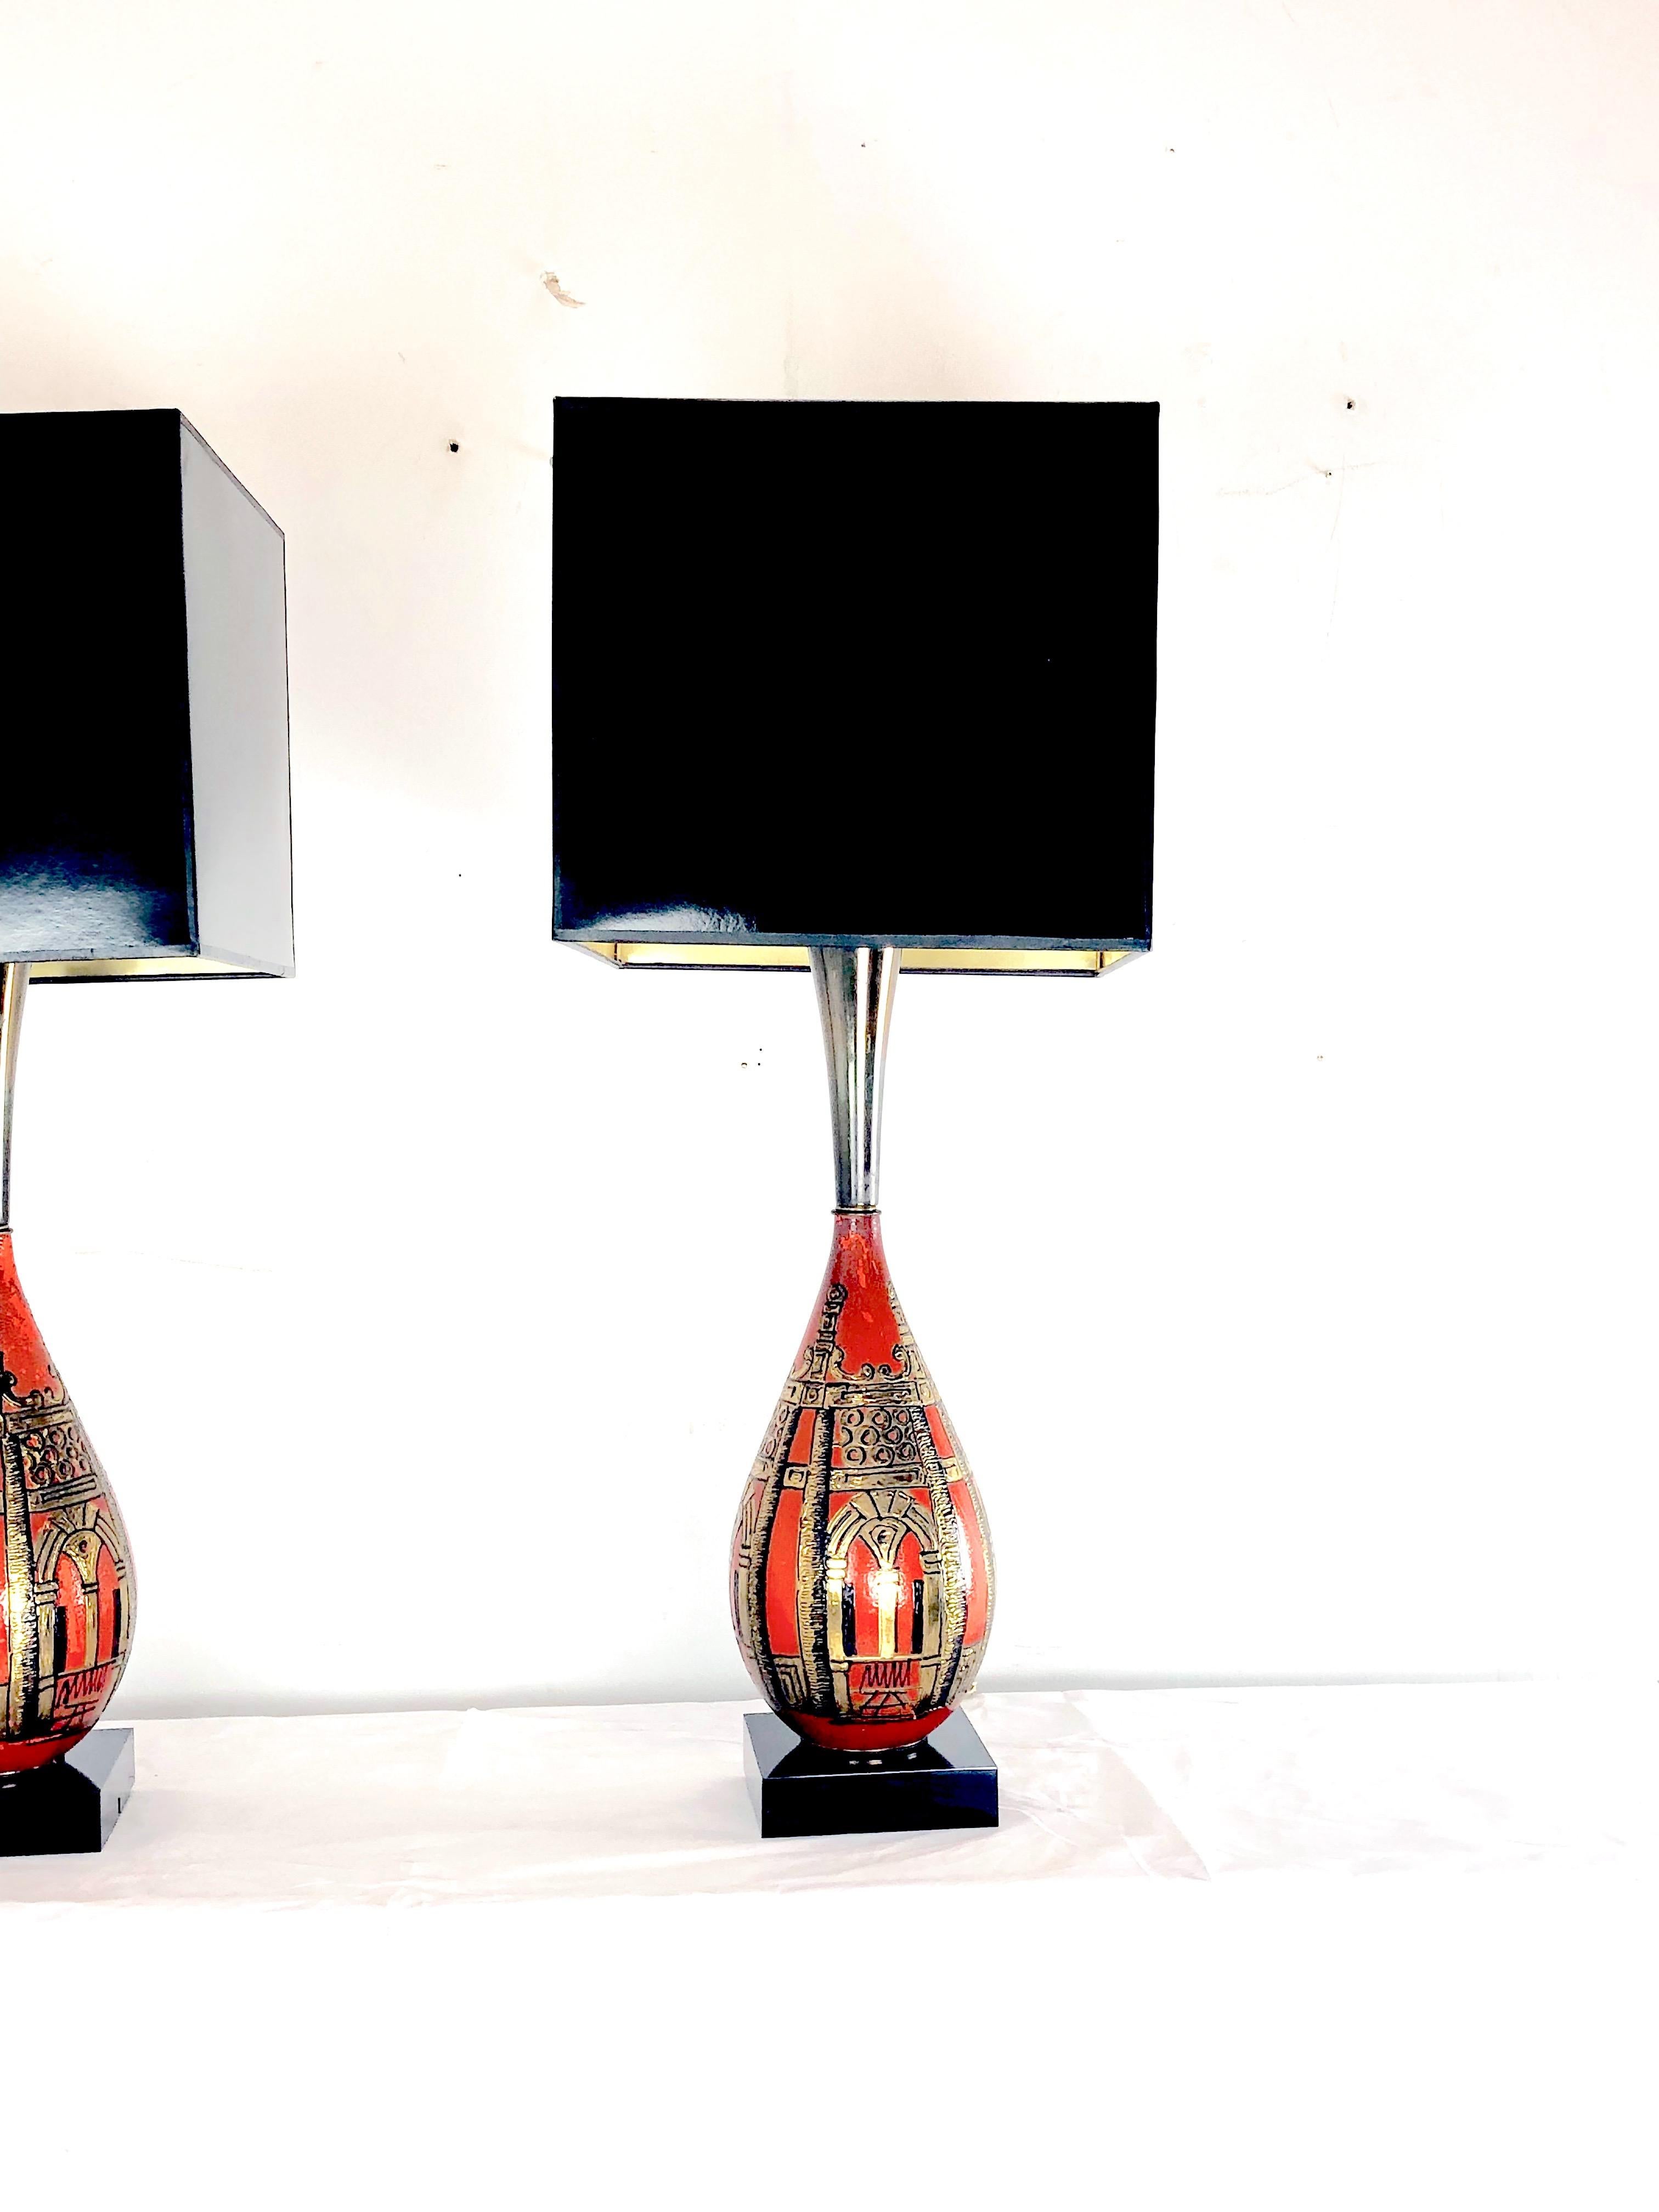 Pair of Gourd Asian table lamps. Lamps are in good vintage condition.
Measures: Lamp
8 W x 8 D x 36 T top of harp
Shade:
14 W x 14 D x 12.5 T.
 